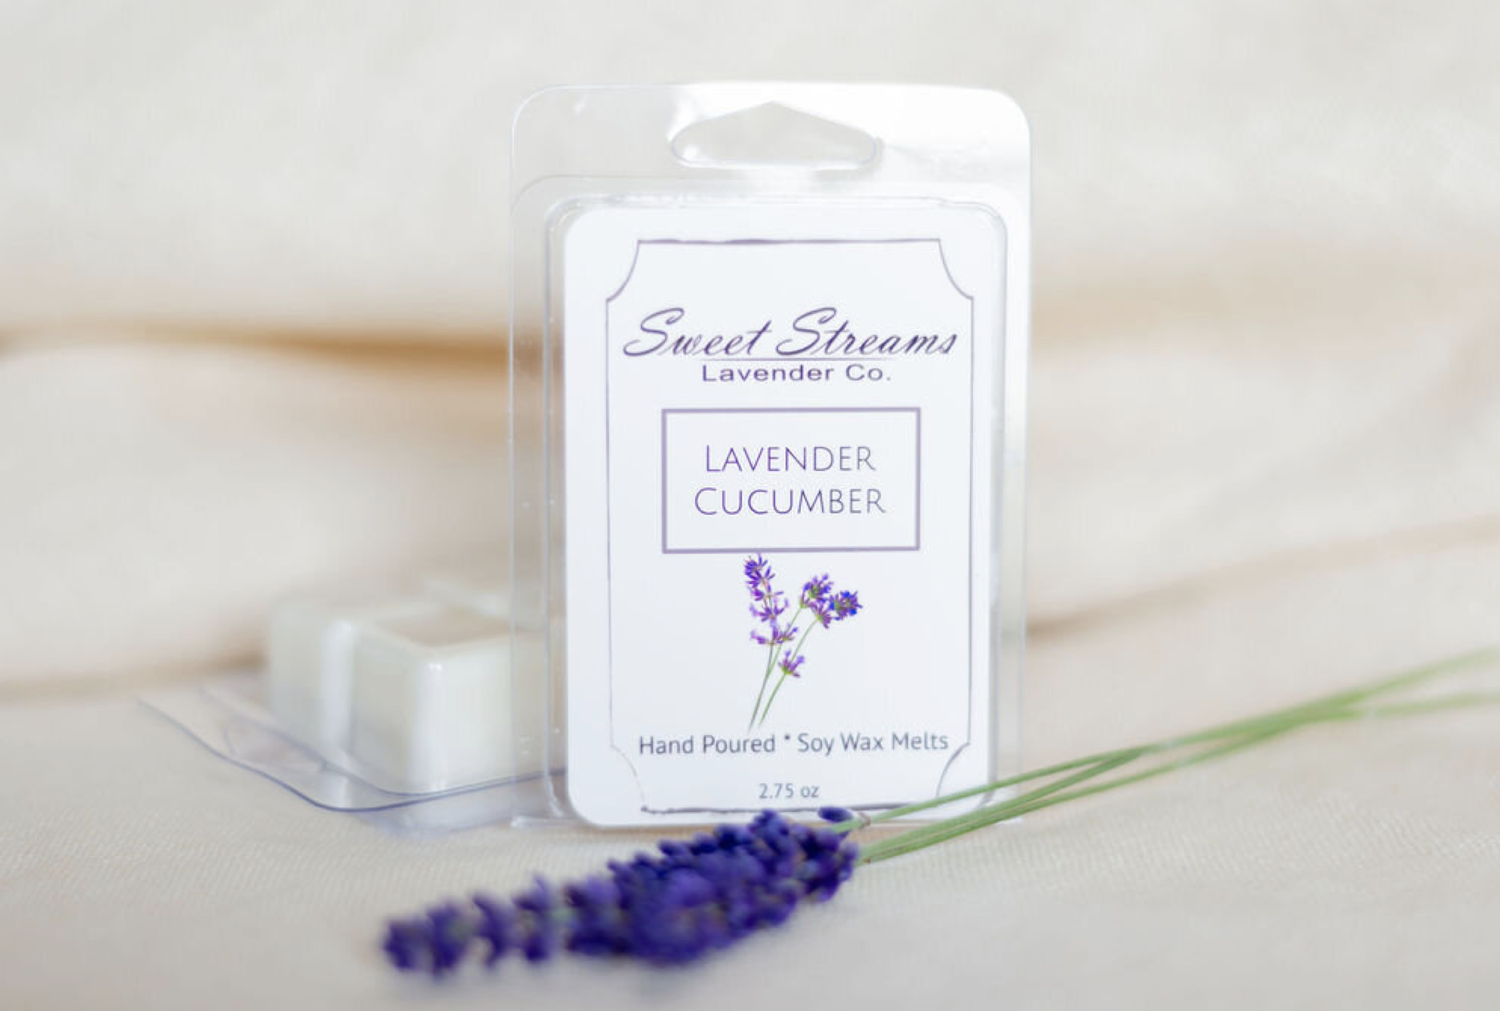 From the Land of Kansas Marketplace. Sweet Streams Lavender Co